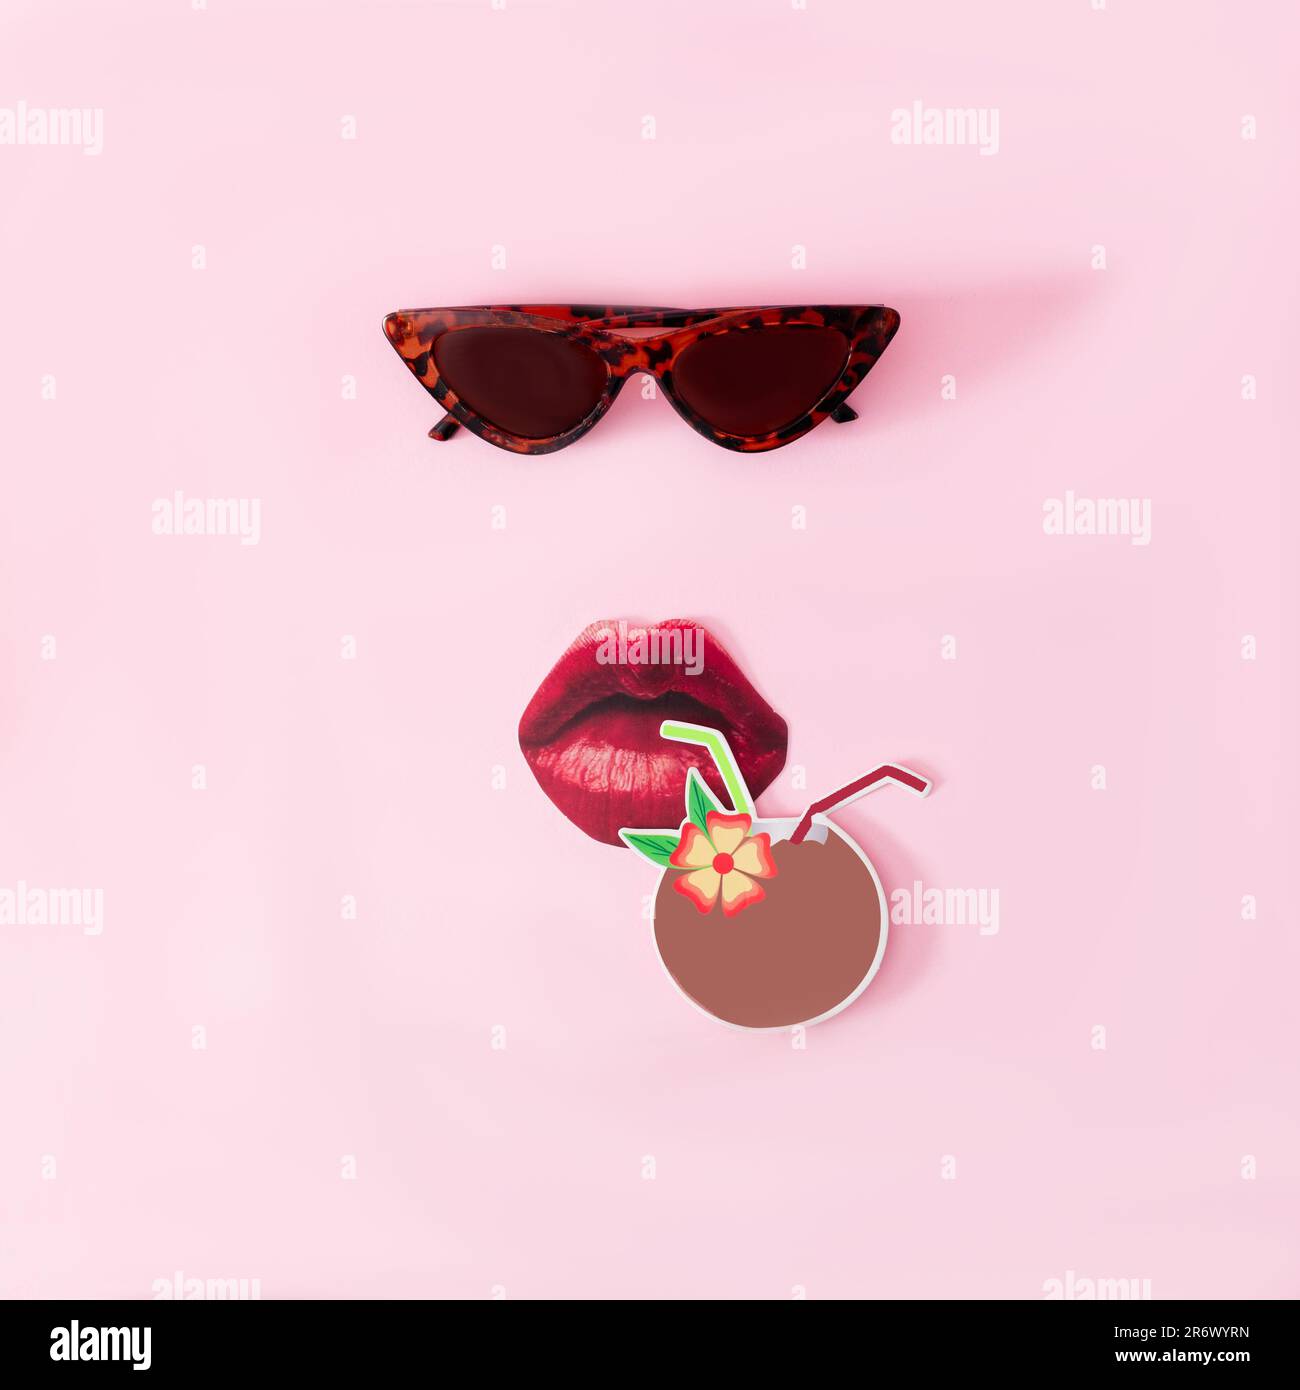 Cat eyes shaped sunglasses, red lips and a coconut with a straw on pink background. Minimal surreal concept for exotic summer holidays advertisement Stock Photo